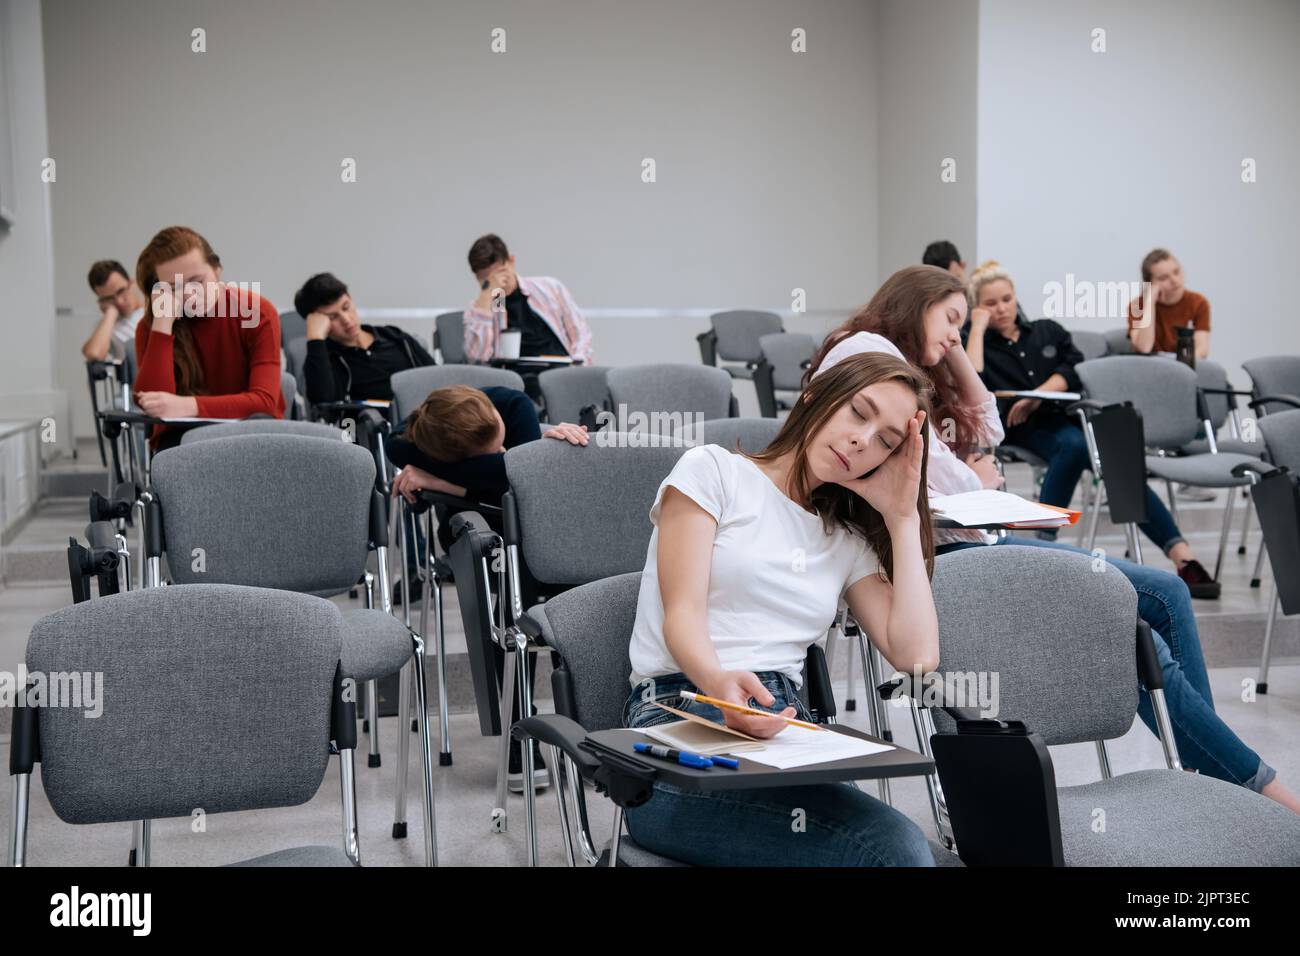 A break between classes in high school. Students rest and sleep in the classroom because of the large number of lessons and overwork. Stock Photo